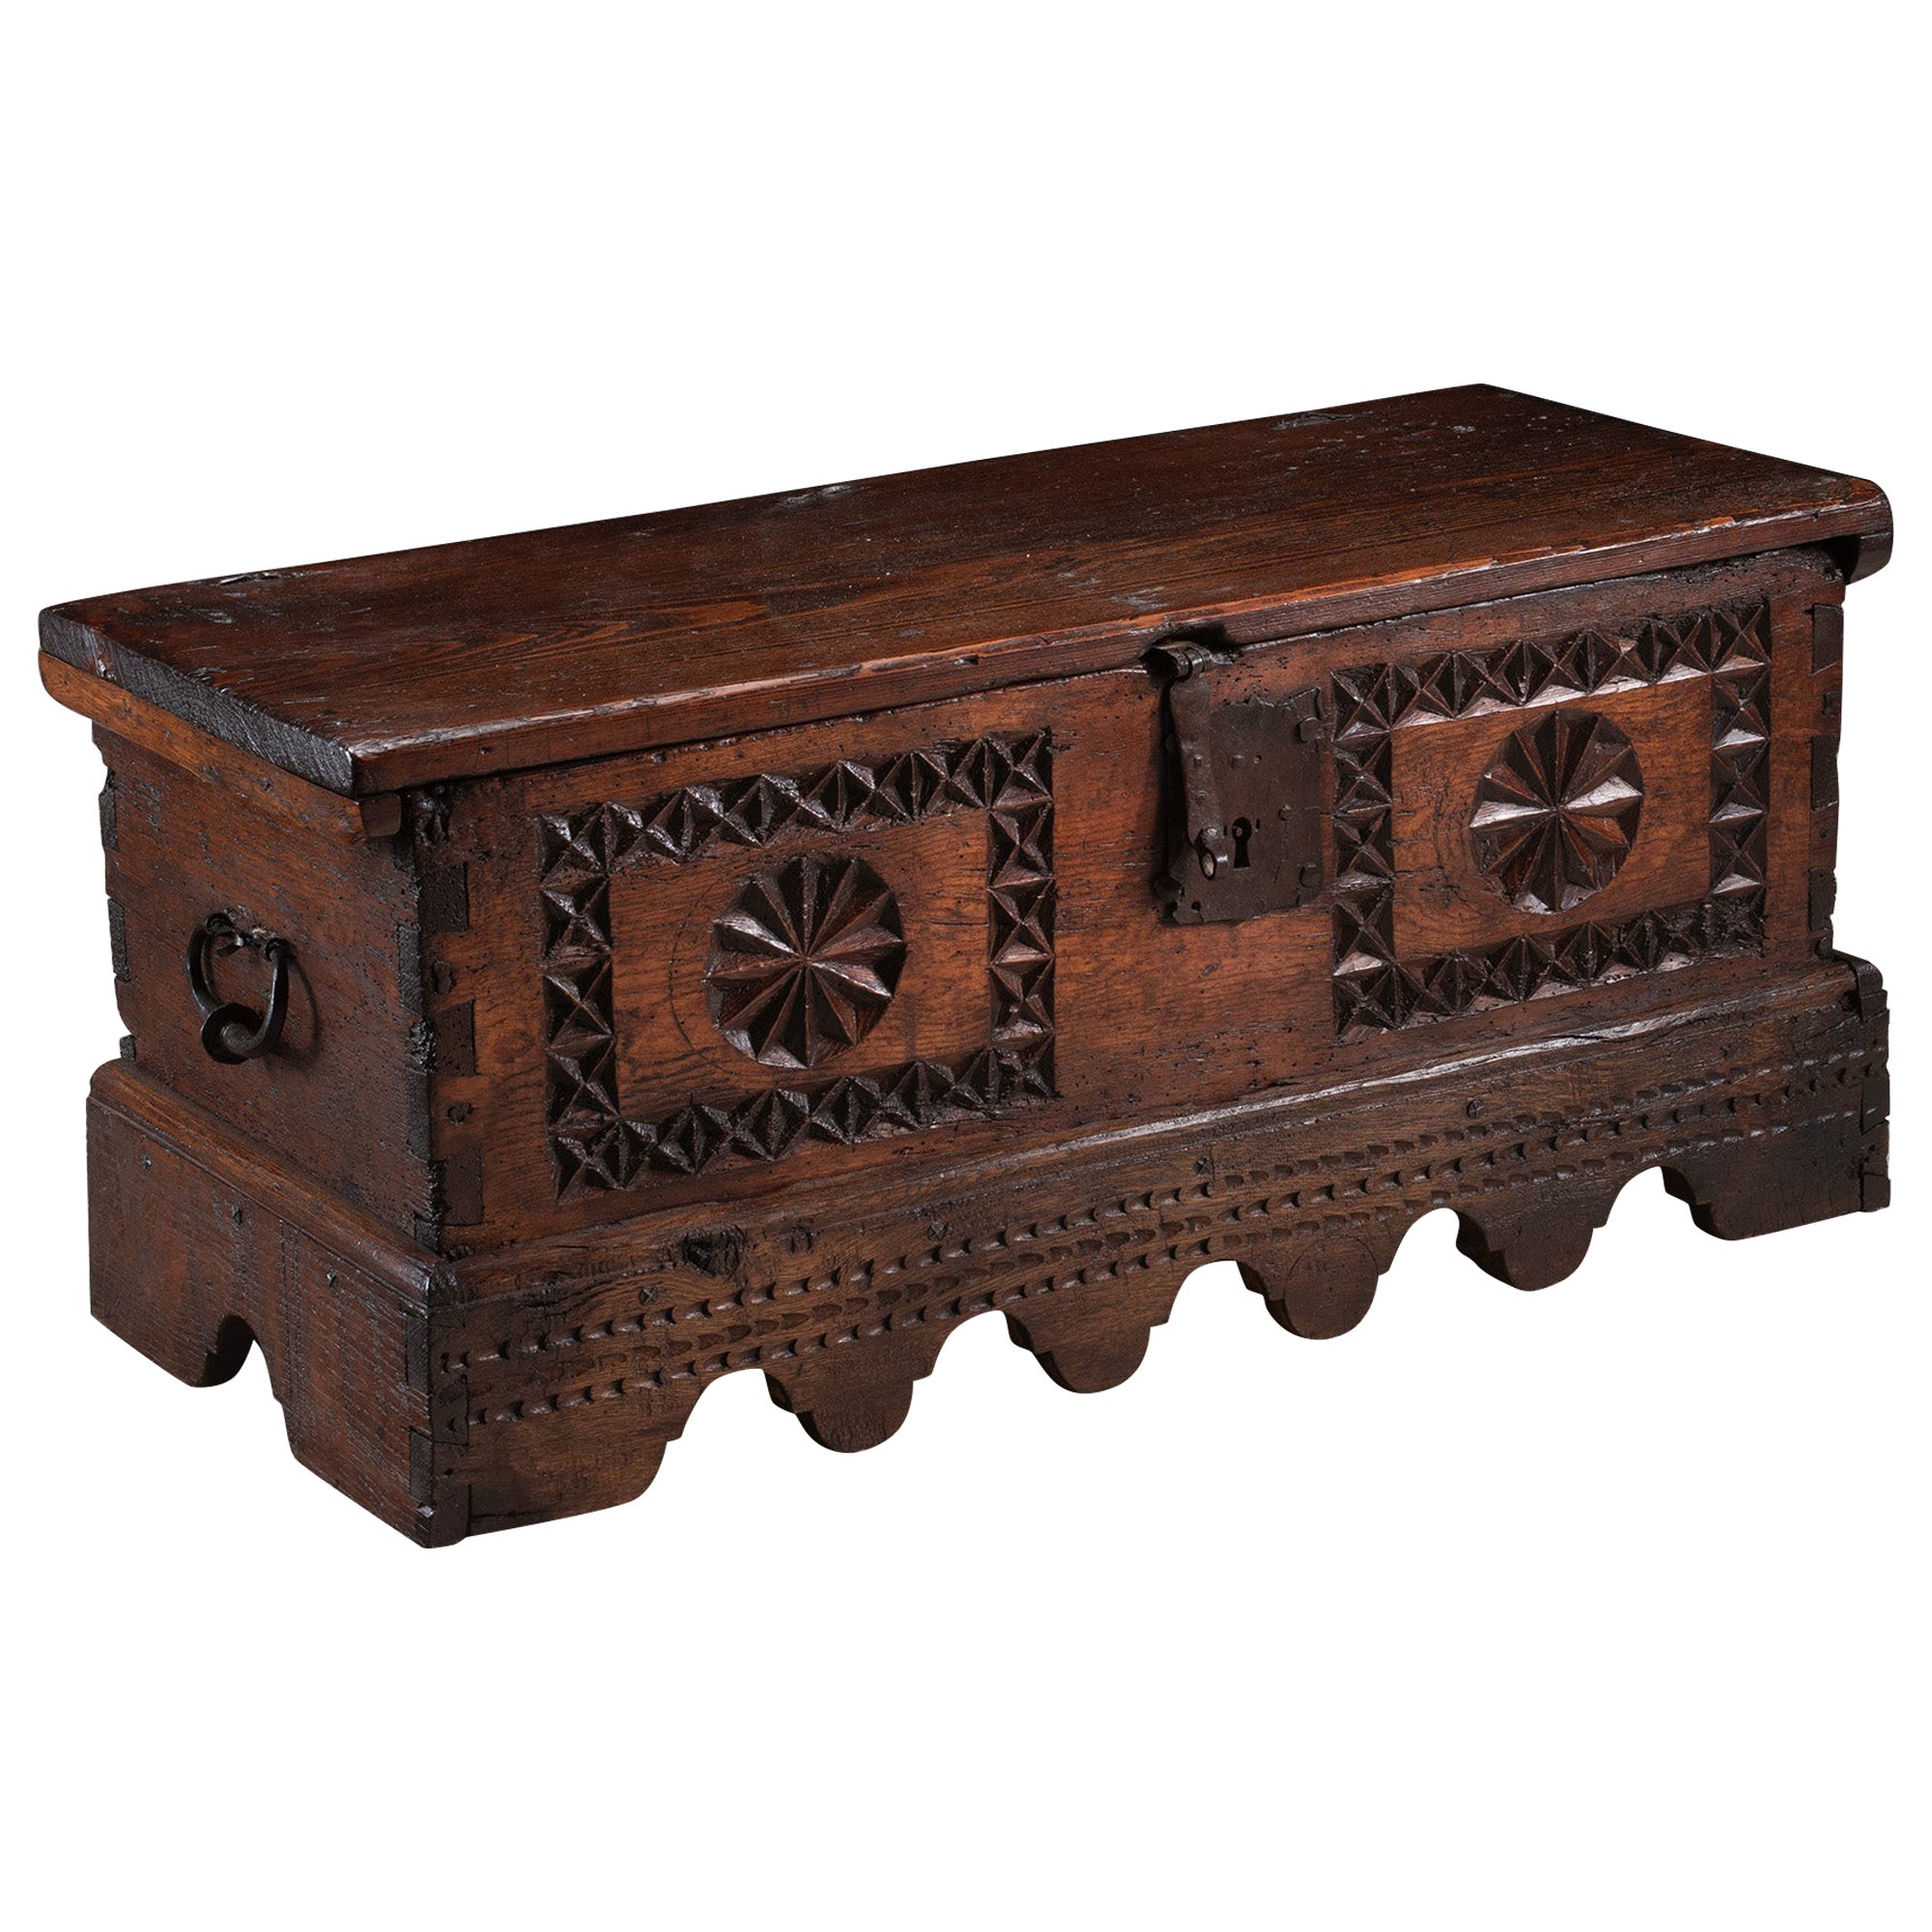 1720s Blanket Chests